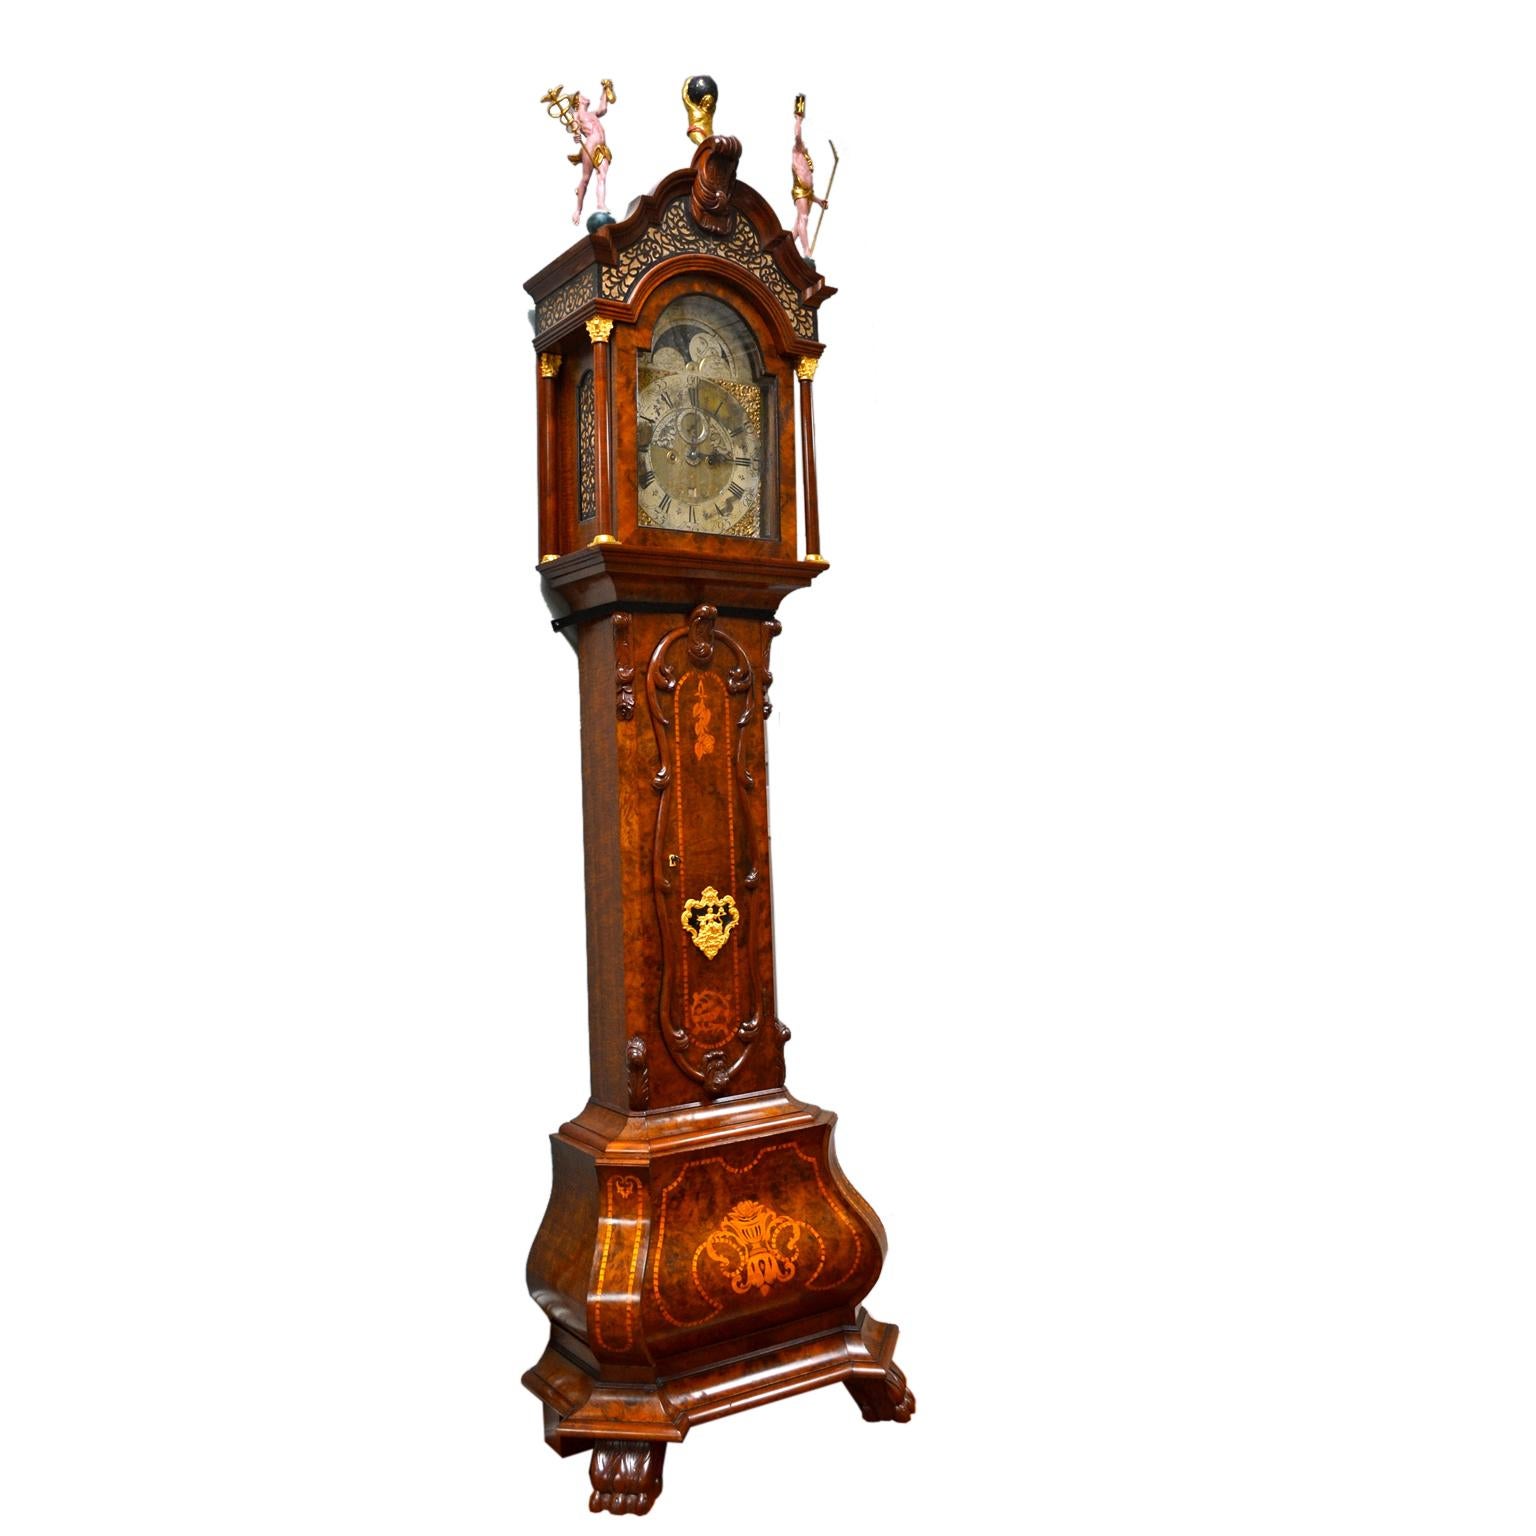 A walnut, burr-walnut and inlaid Dutch longcase clock by W.V Dadelbeek, Utrecht. The case of typical form, trunk door with feather banding, bombe base, original carved painted and parcel gilt wood figural finials of Atlas, Father Time and Mercury.